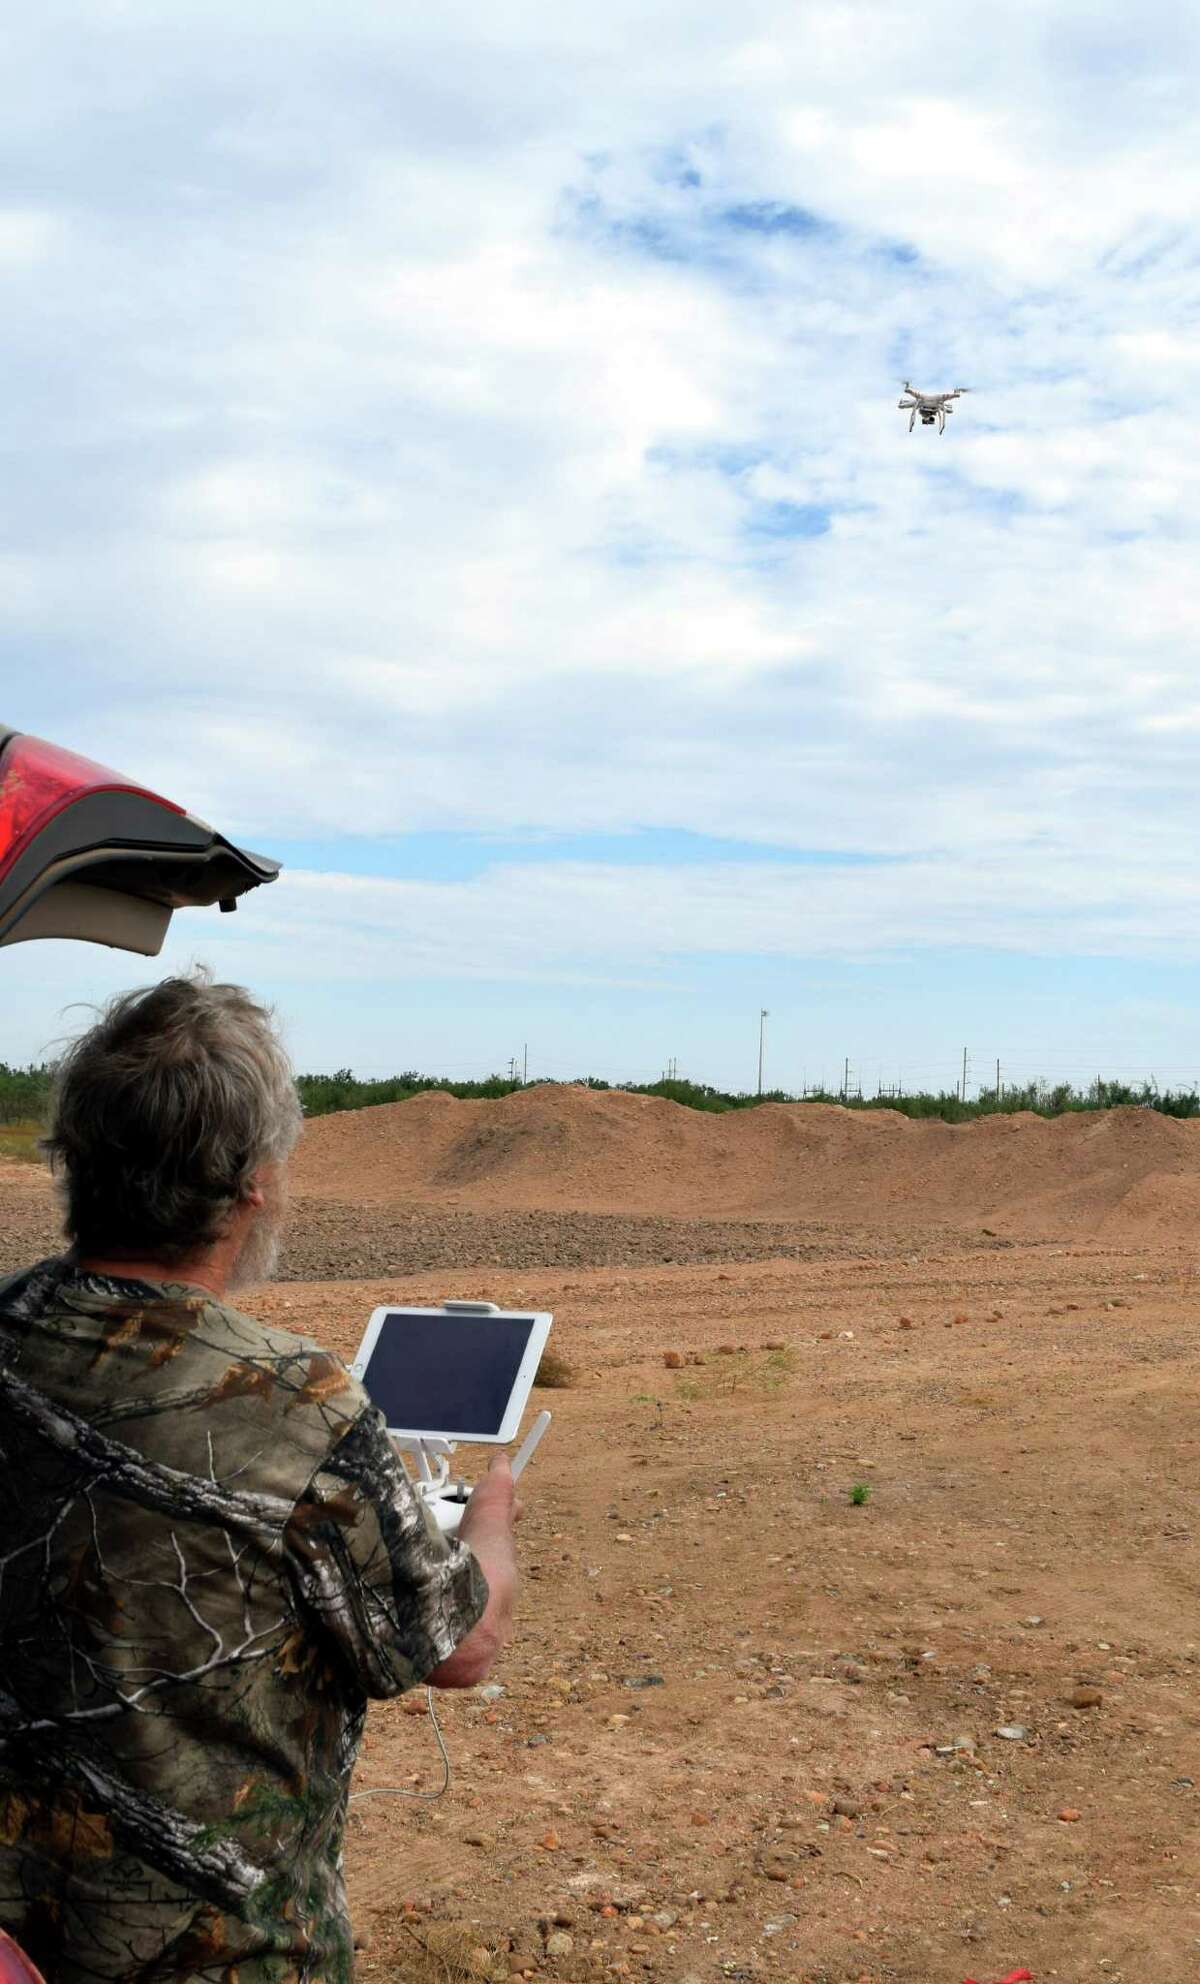 Lifting off after being program for a specific flight pattern, this drone being put into use by Jim Raby of San Antonio has helped the hunter use high-tech to help monitor his hunting area.